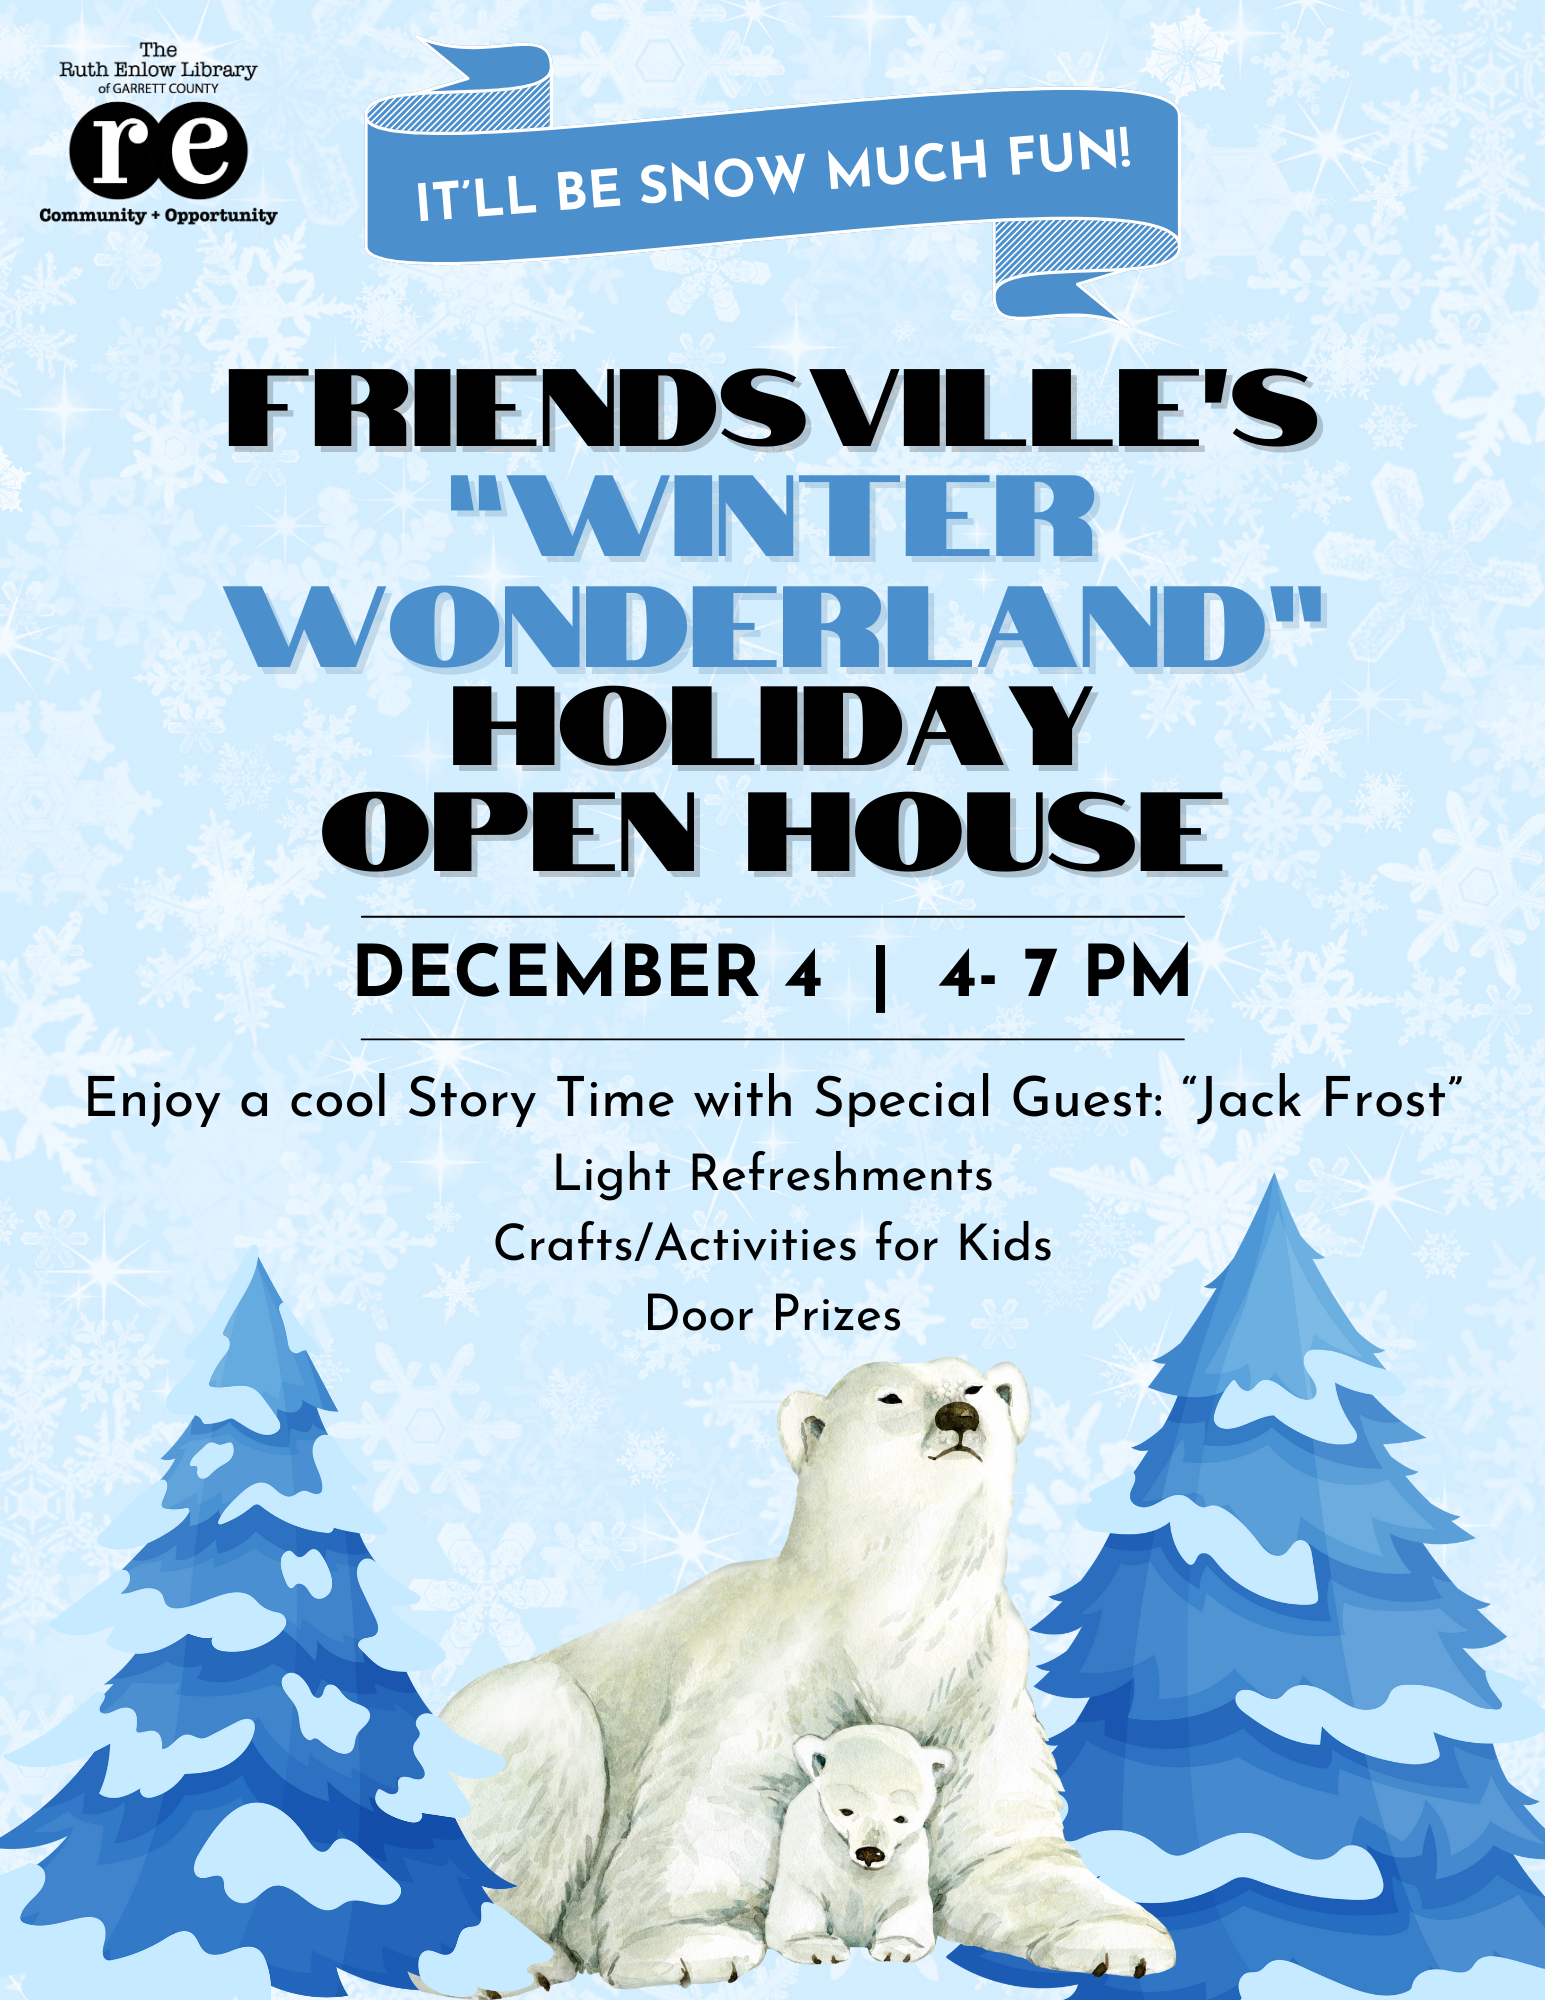 Flyer displaying outdoor wintry background and polar bear. Includes details of Friendsville Holiday Open House.